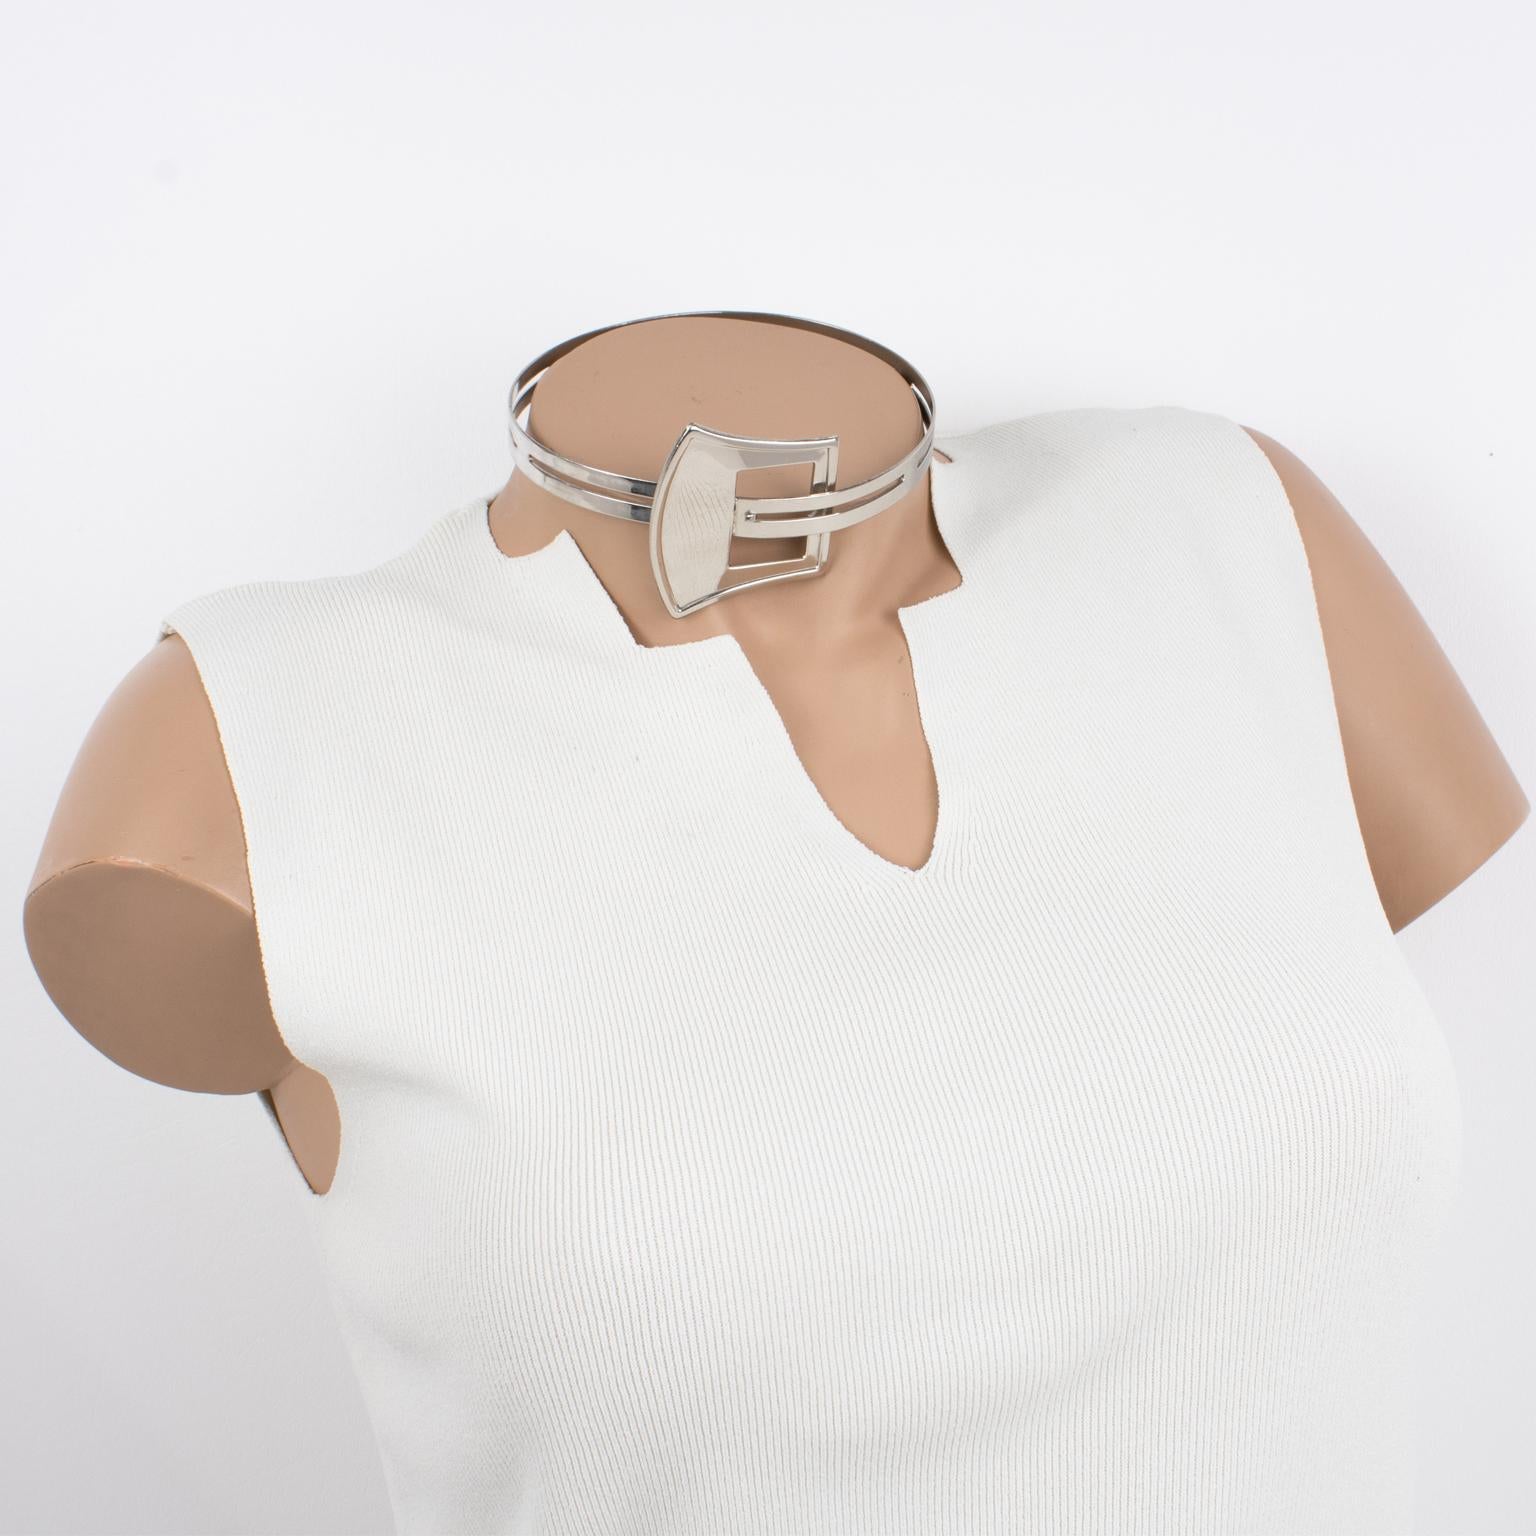 This stunning modernist rigid collar necklace boasts a silvered metal articulated neckband with metal all textured and see-thru embellished with a belt buckle design. The fastening system is hidden in the belt buckle design. There is no visible